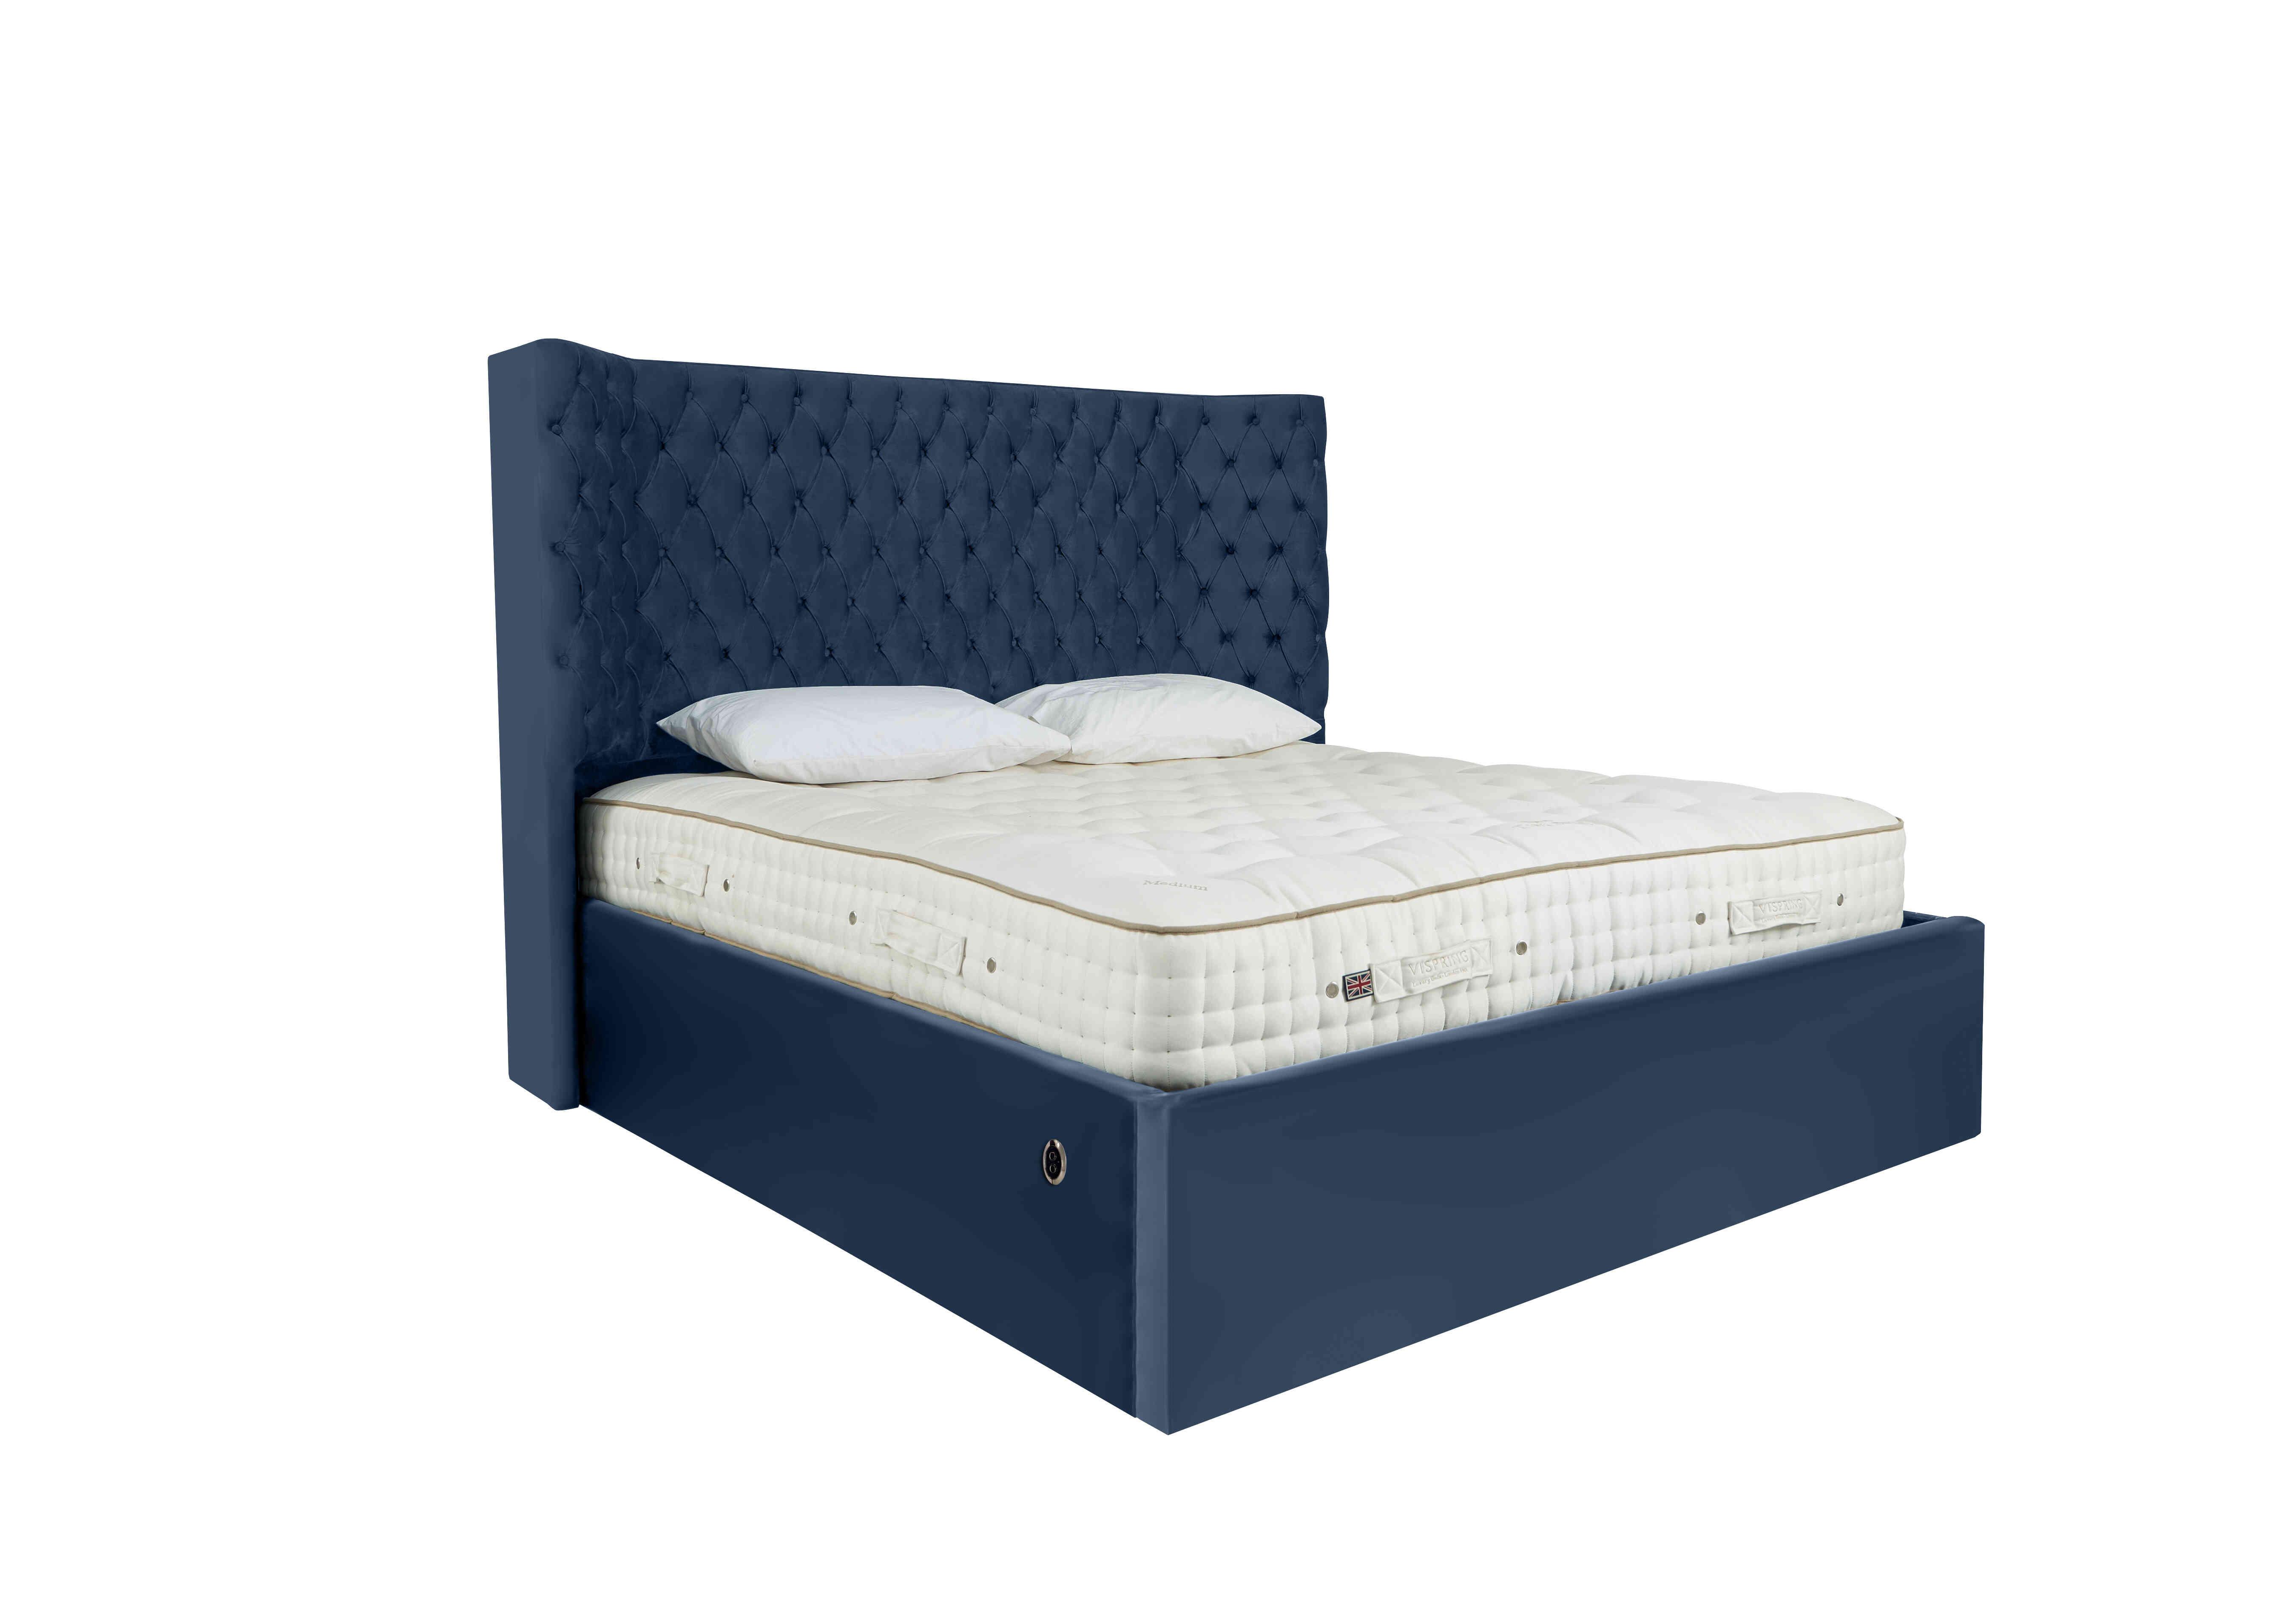 Maximus Electric Ottoman Bed Frame in Velvet Navy on Furniture Village